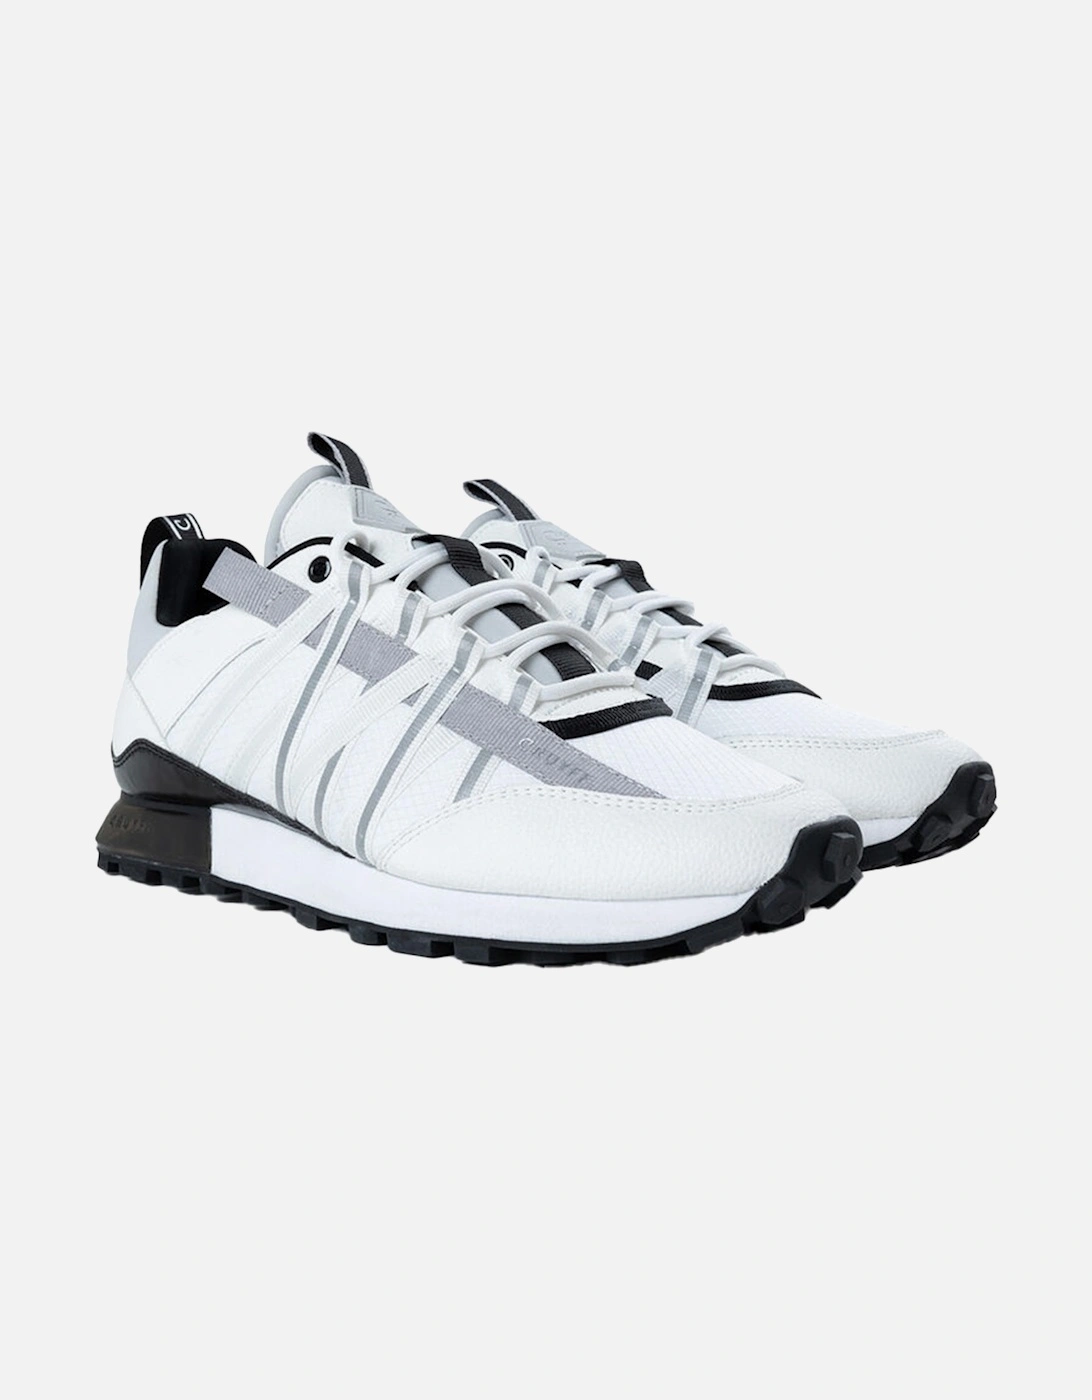 Mens Fearia Tumbled Ripstop Trainers (White)